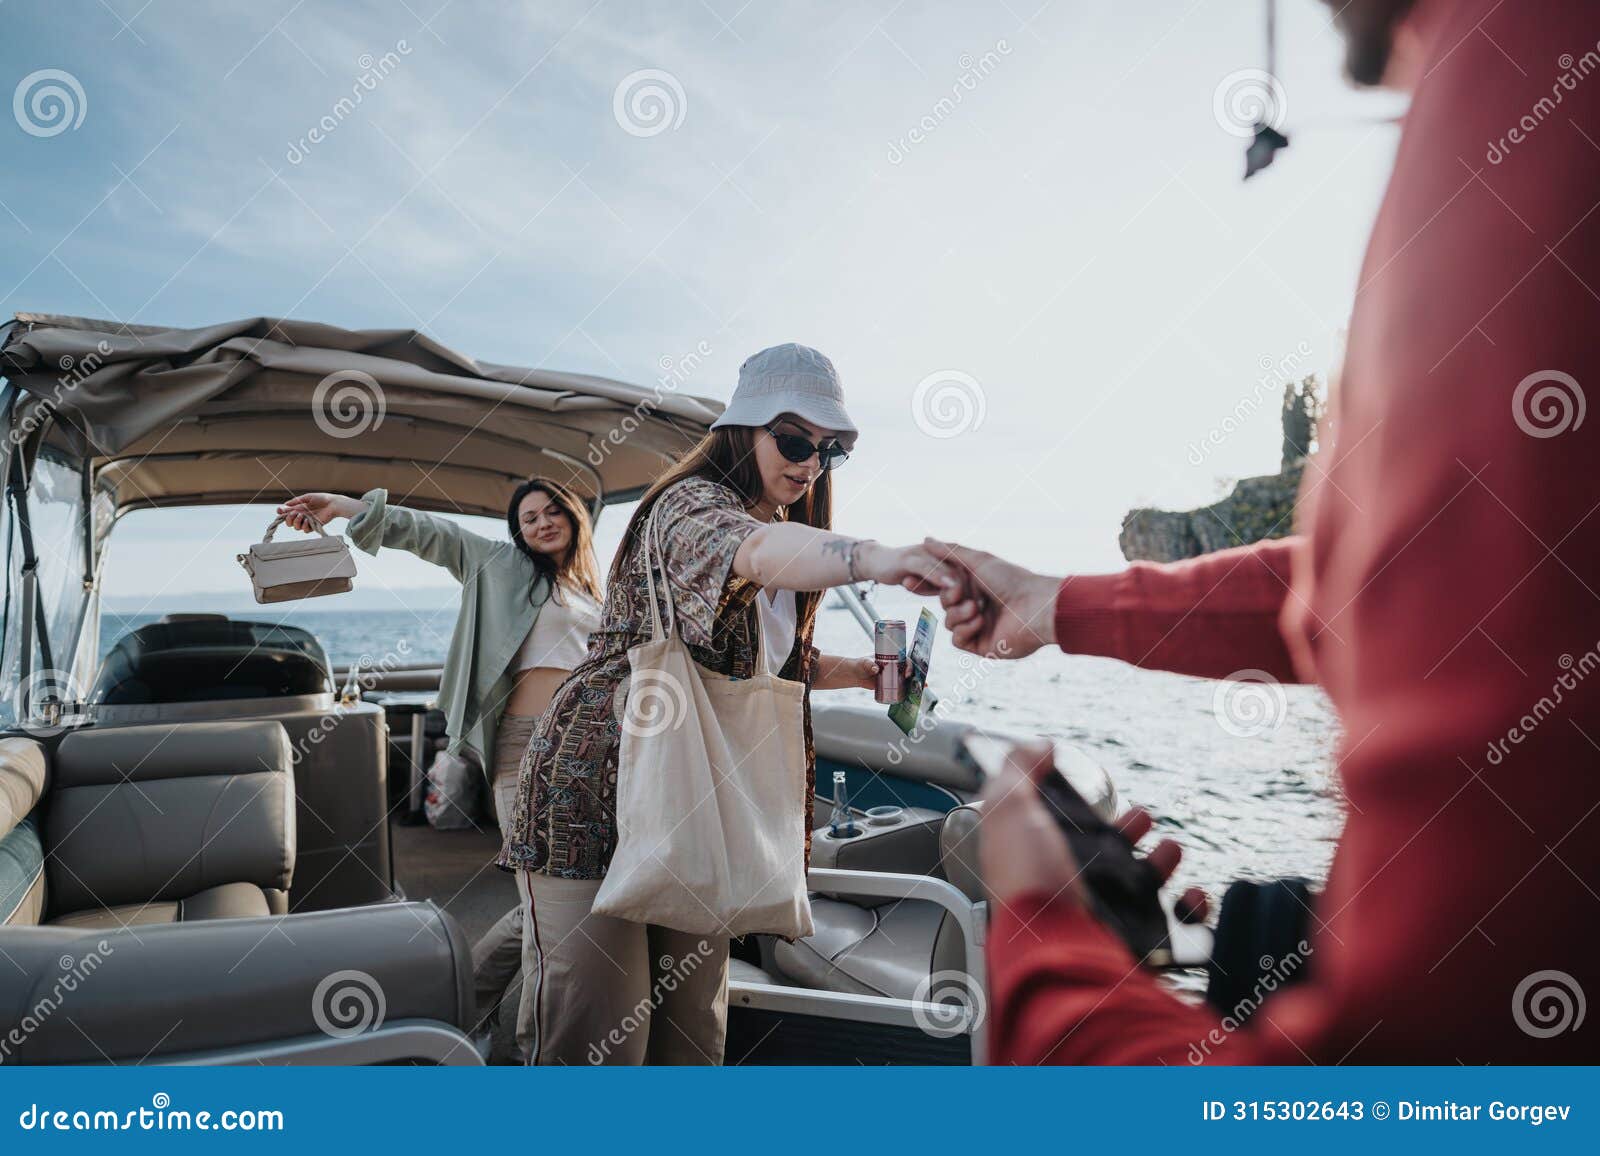 boatman assisting young woman disembarking from a boat with care